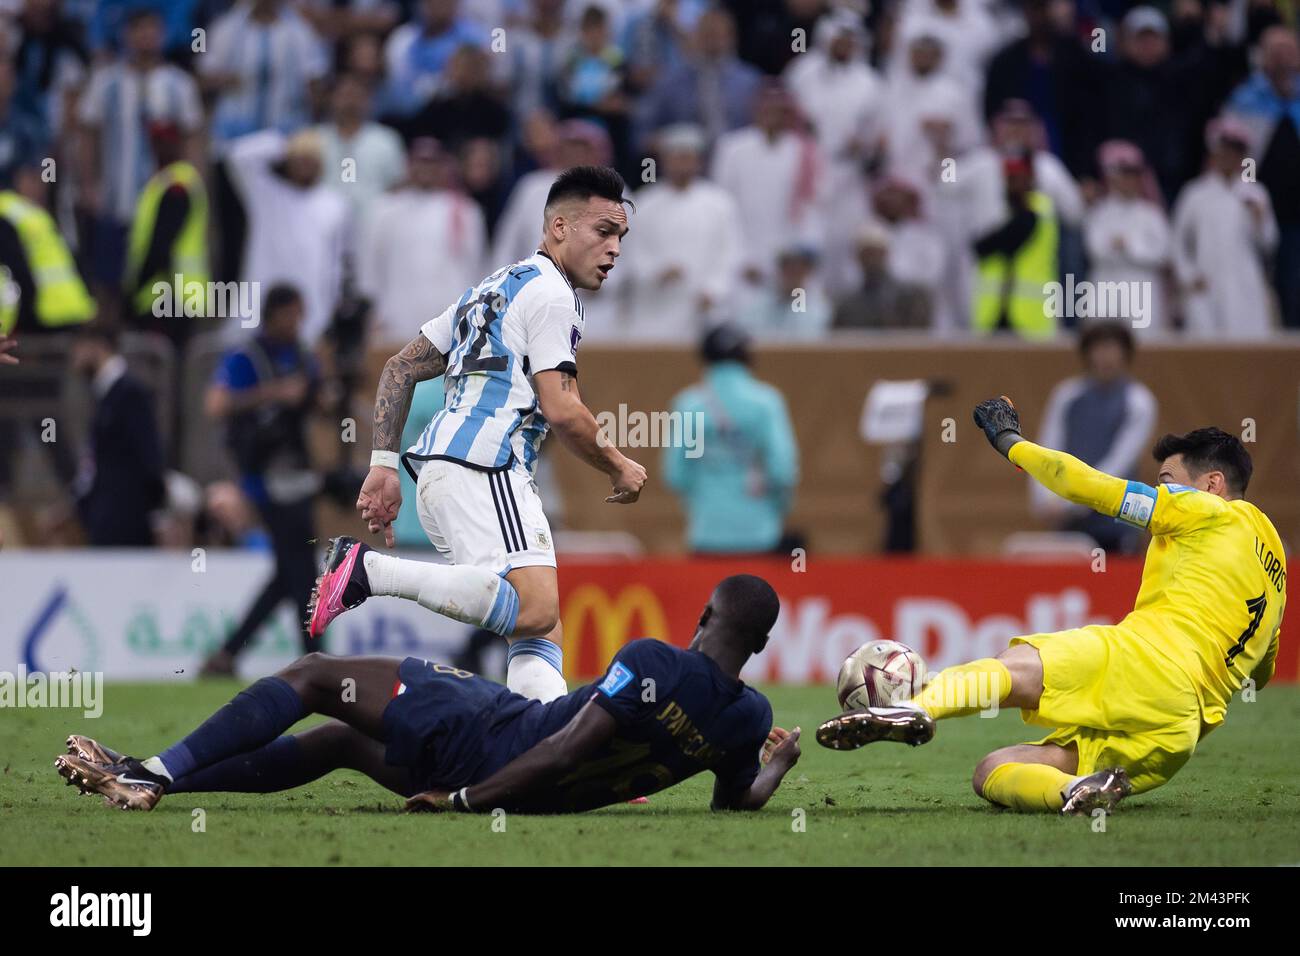 Doha, Brazil. 18th Dec, 2022. Qatar - Doha - 12/18/2022 - 2022 WORLD CUP FINAL, ARGENTINA VS FRANCE - Lautaro Martinez, Argentina player, competes with France goalkeeper Lloris during a match at the Lusail stadium for the 2022 World Cup championship. Photo: Pedro Martins/AGIF/Sipa USA Credit: Sipa USA/Alamy Live News Stock Photo